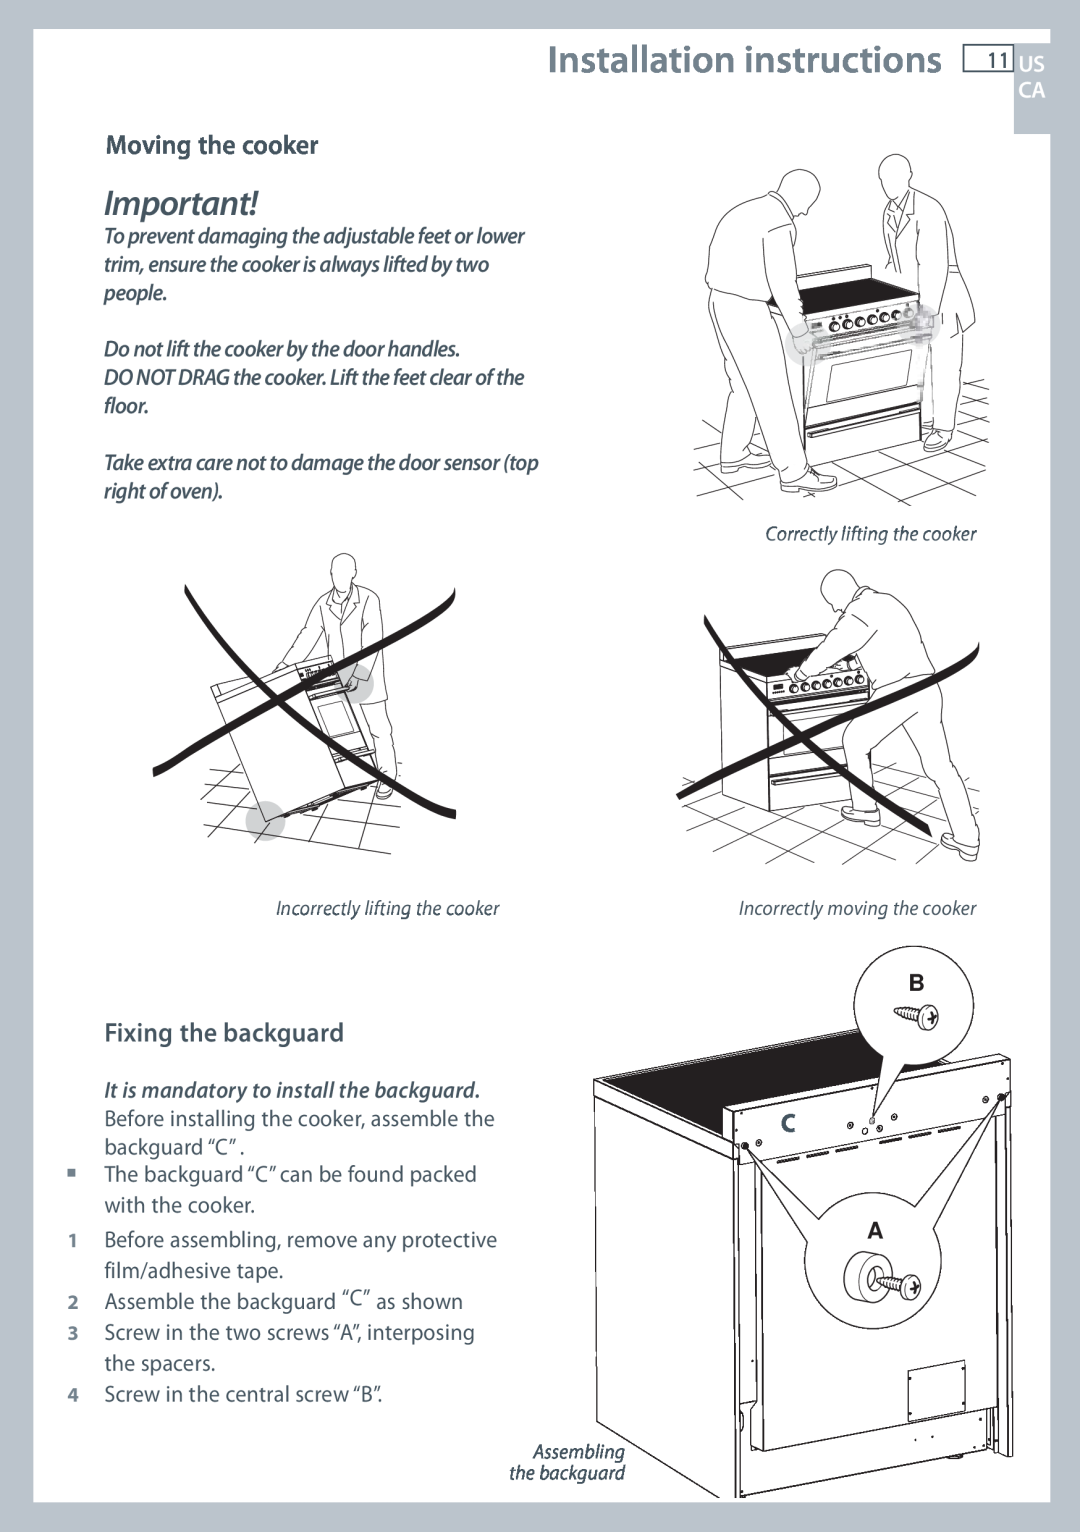 Fisher & Paykel OR305SDPWSX Installation instructions 11 US, Moving the cooker, Fixing the backguard 